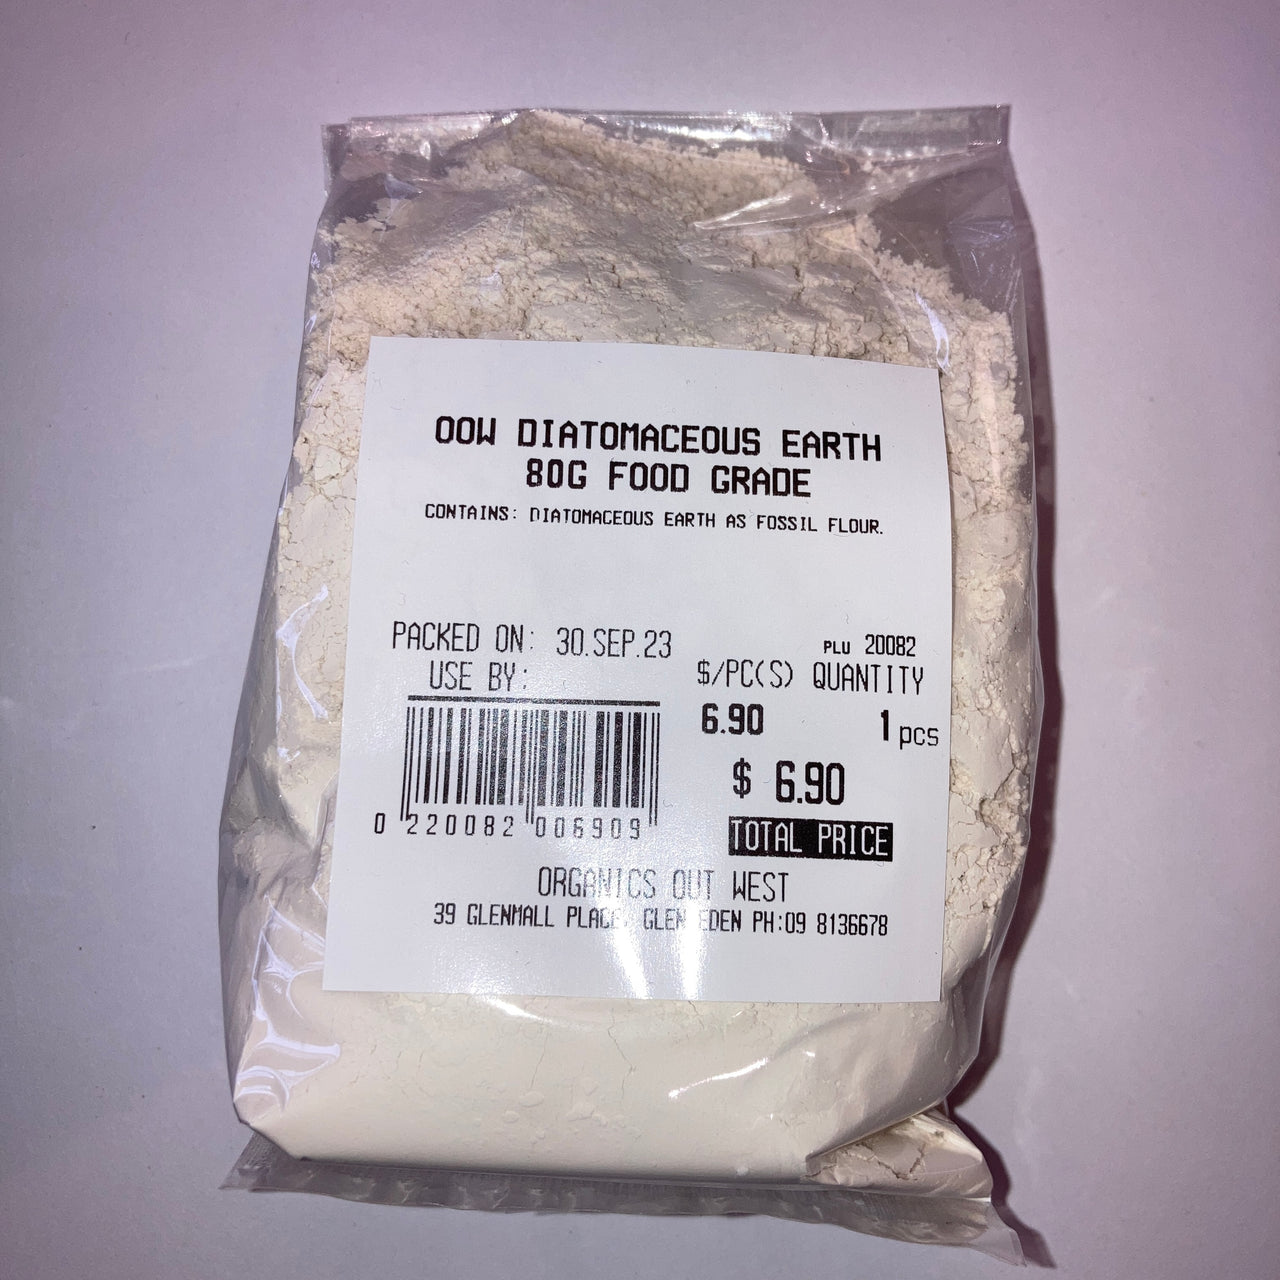 Organics Out West - Diatomaceous Earth Food Grade - [100g]